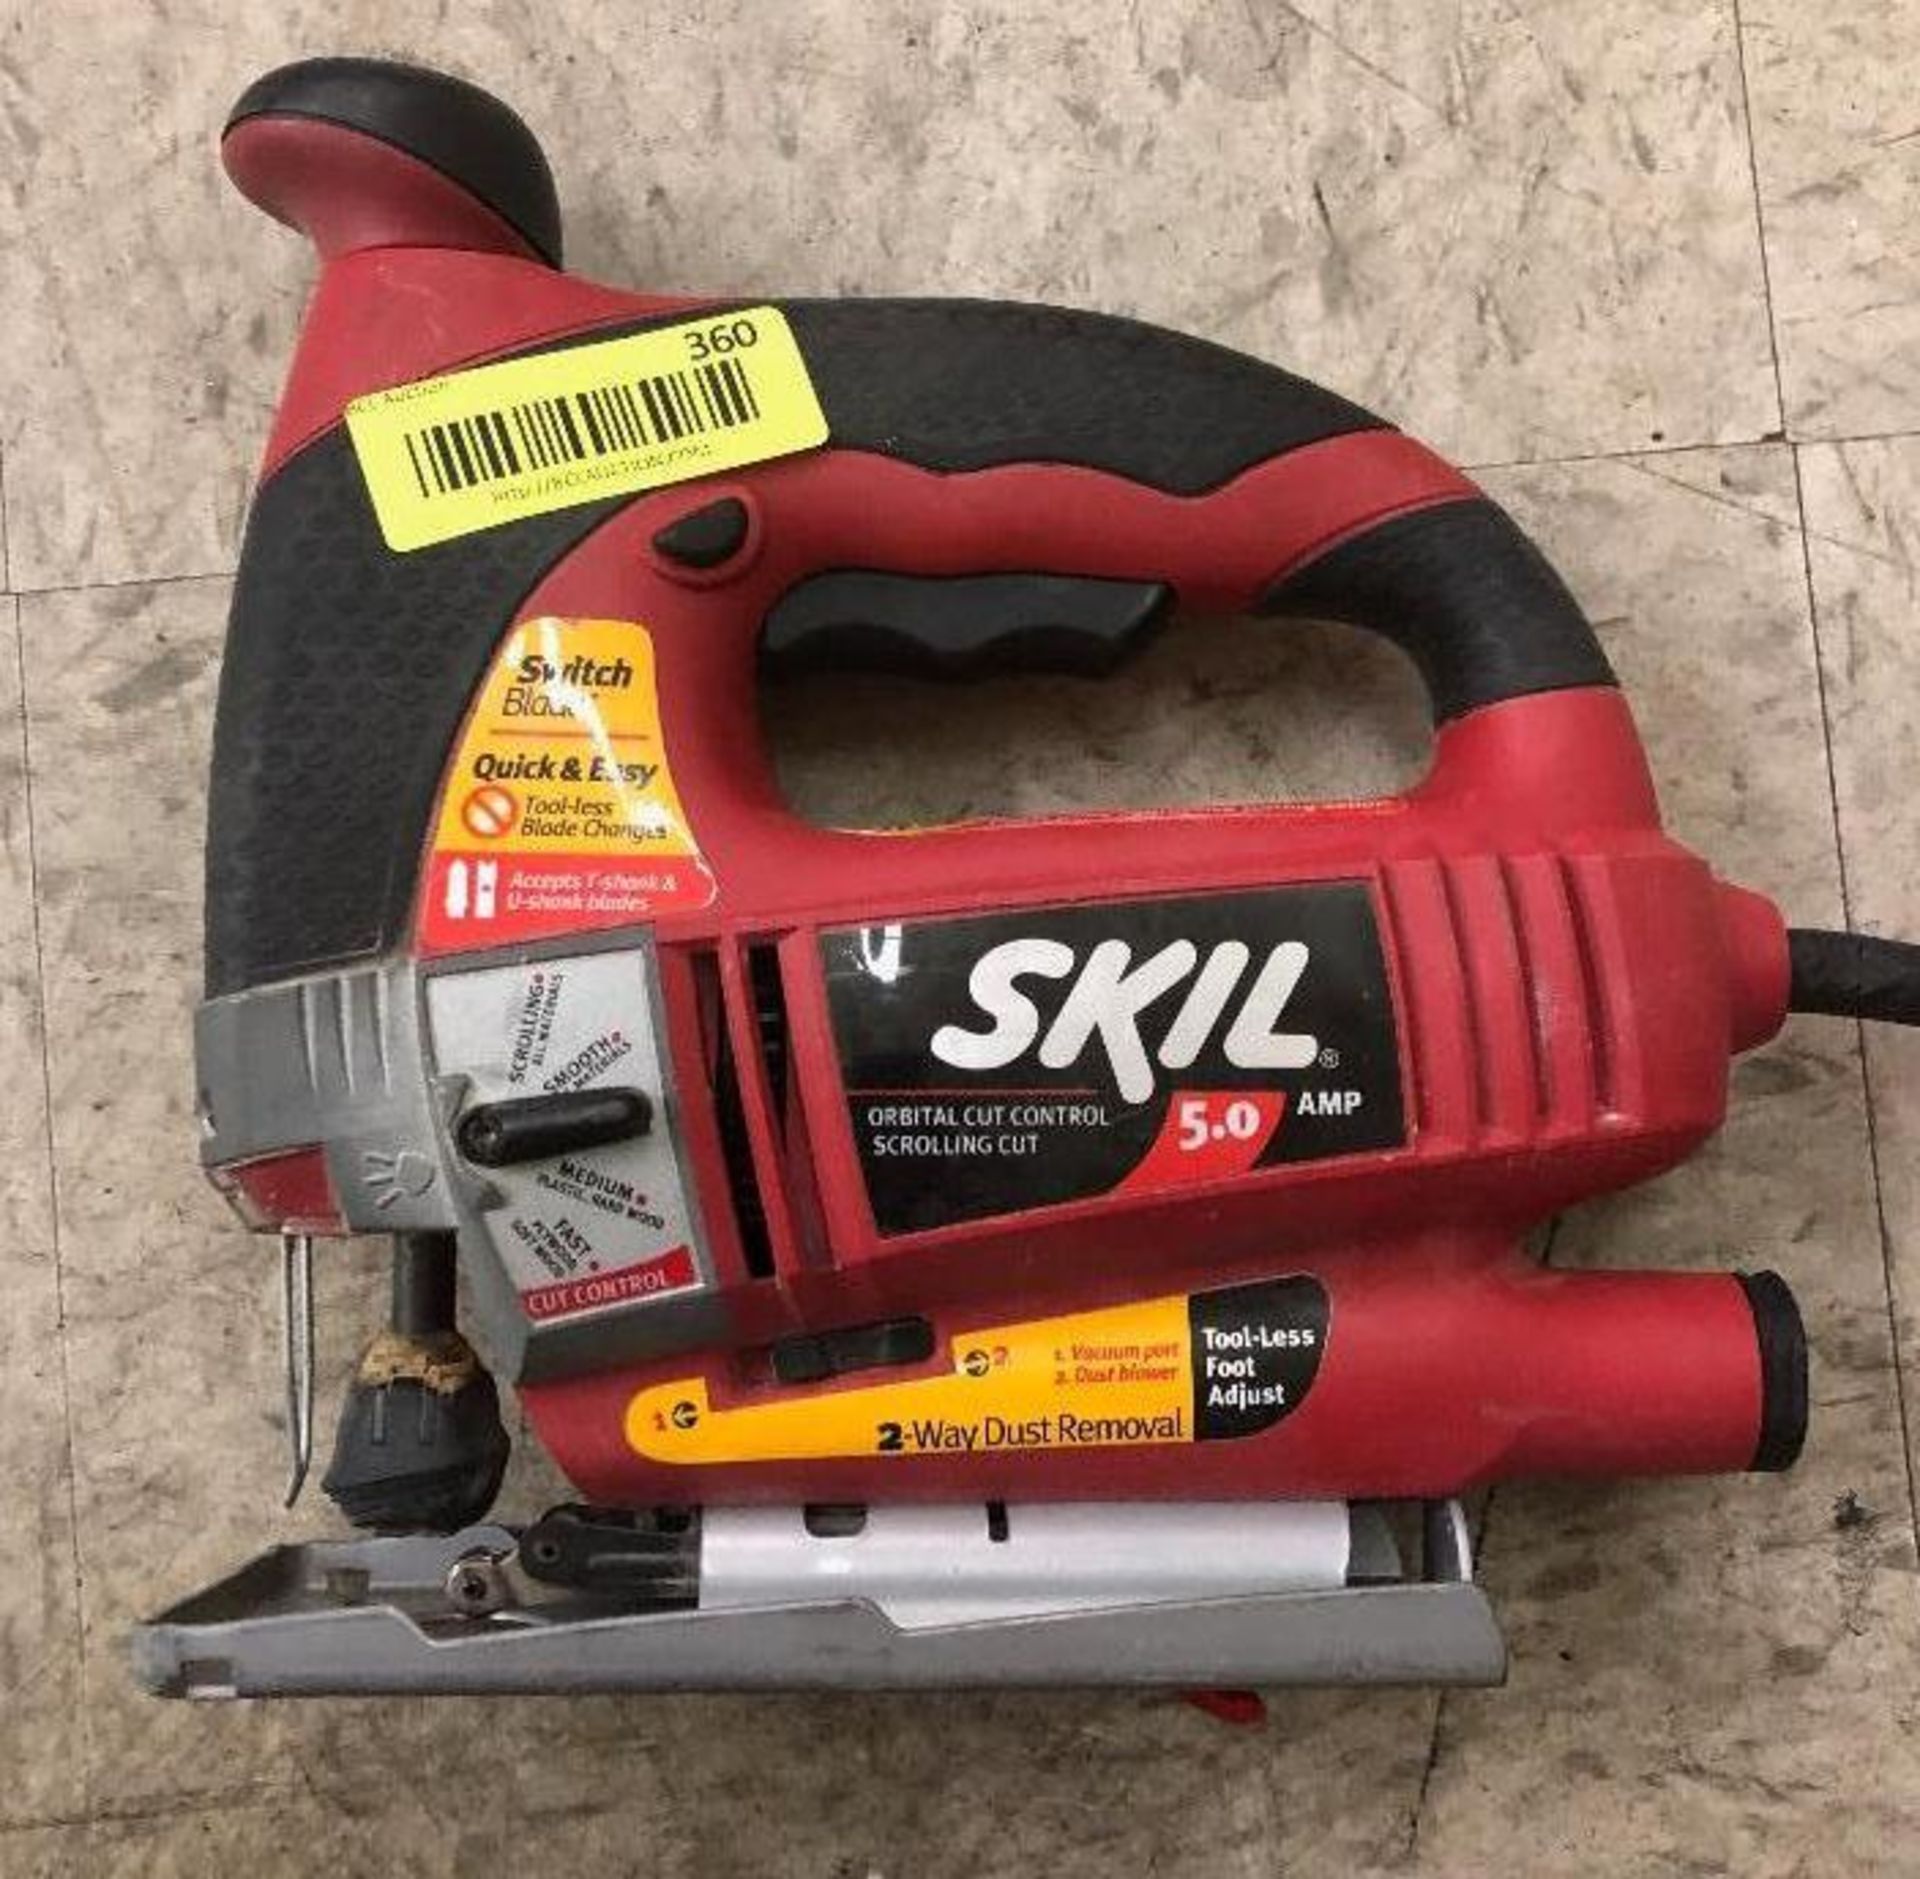 DESCRIPTION: SKIL 5.0 AMP JIG SAW LOCATION: ASSEMBLY ROOM QTY: 1